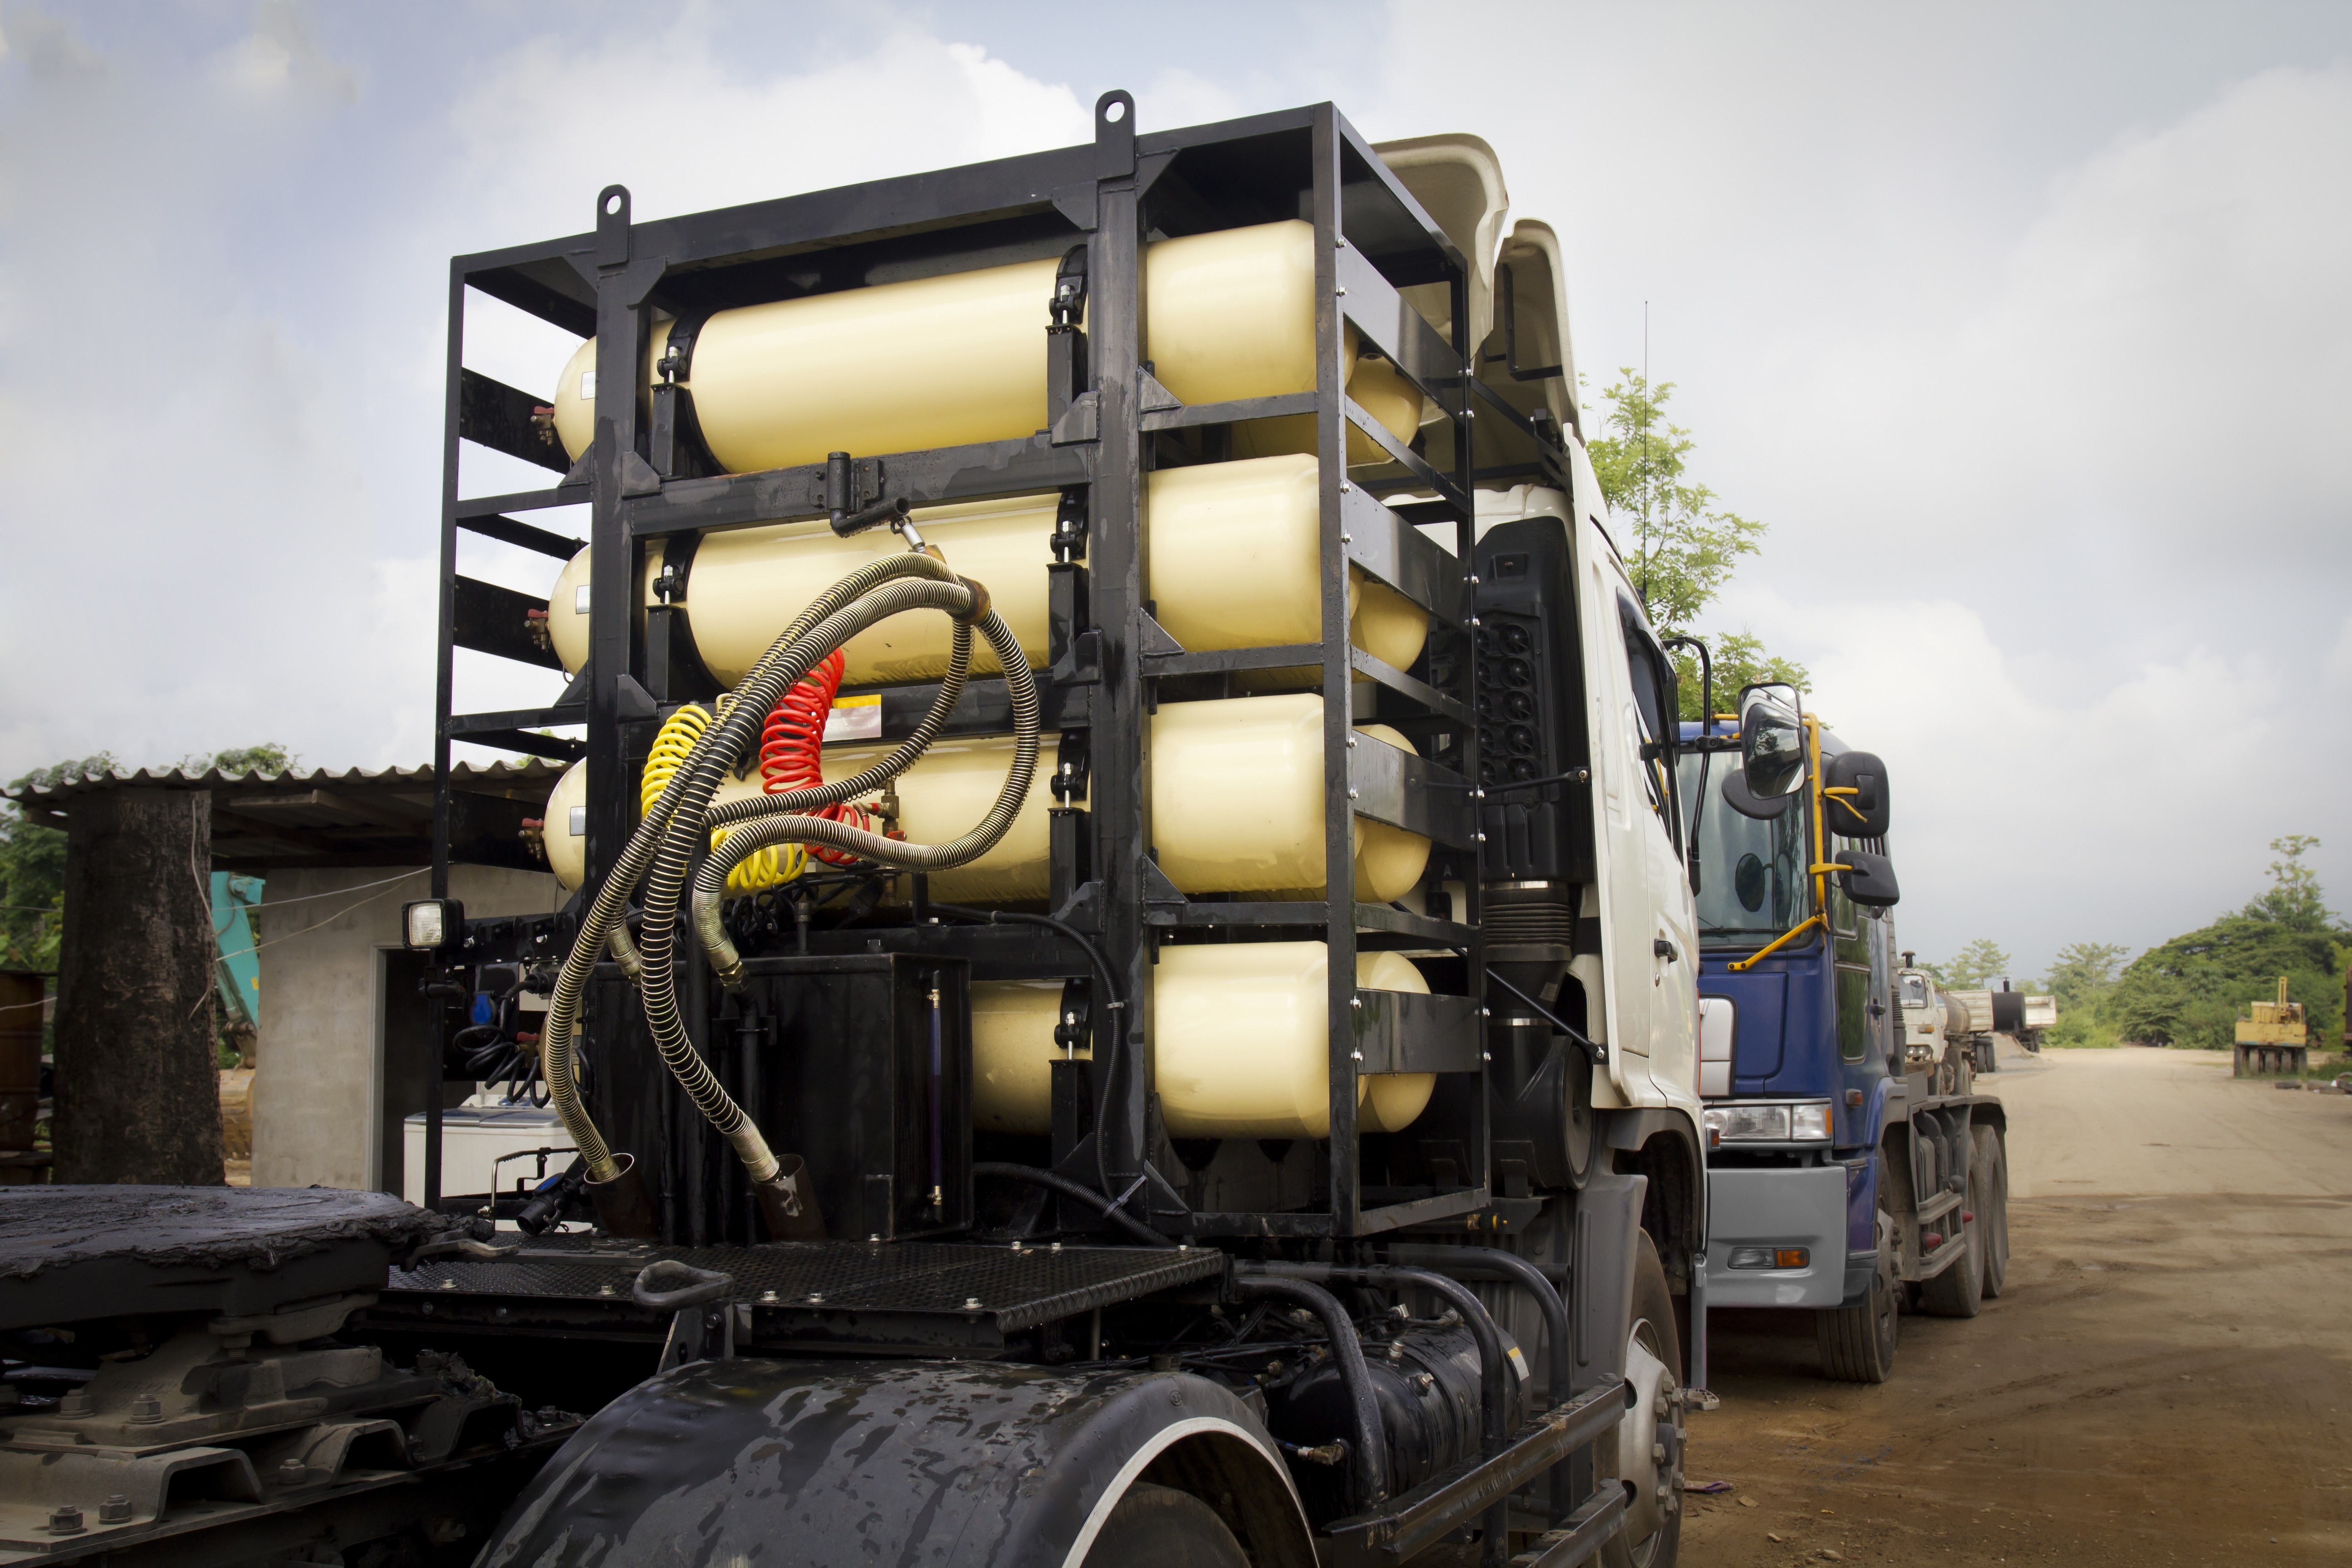 CNG / NGV gas tanks for heavy truck , alternative fuel